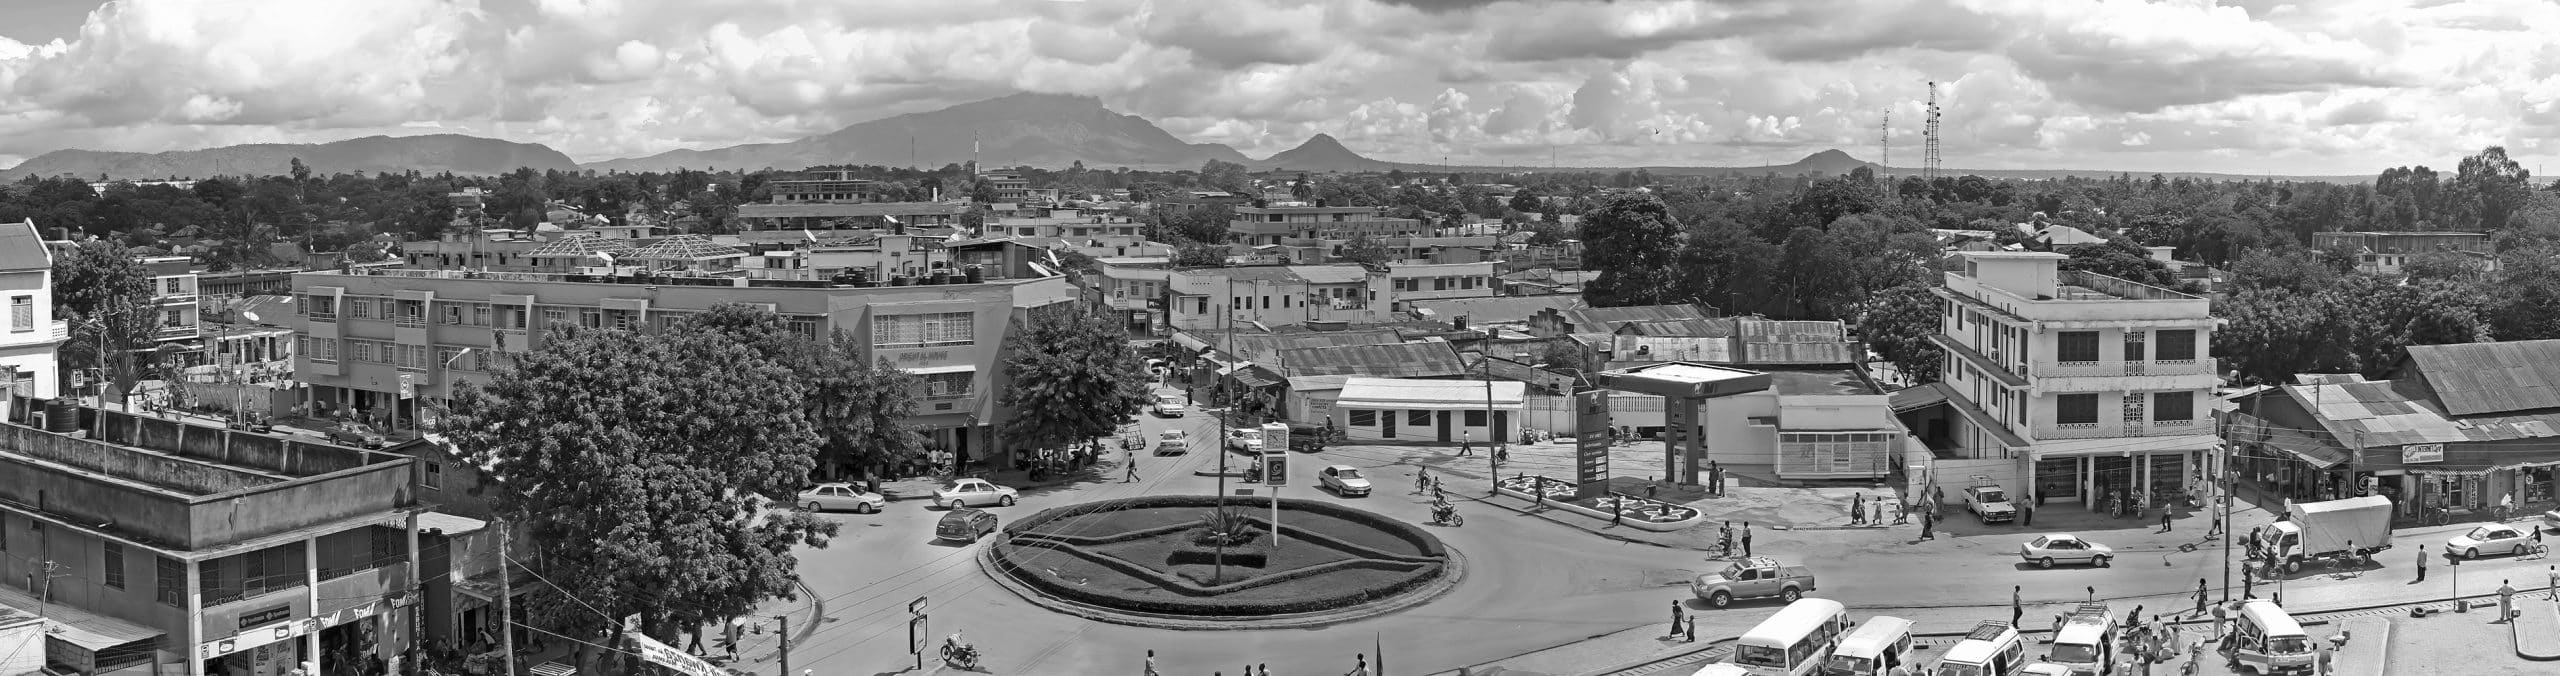 Aerial view of the Morogoro city